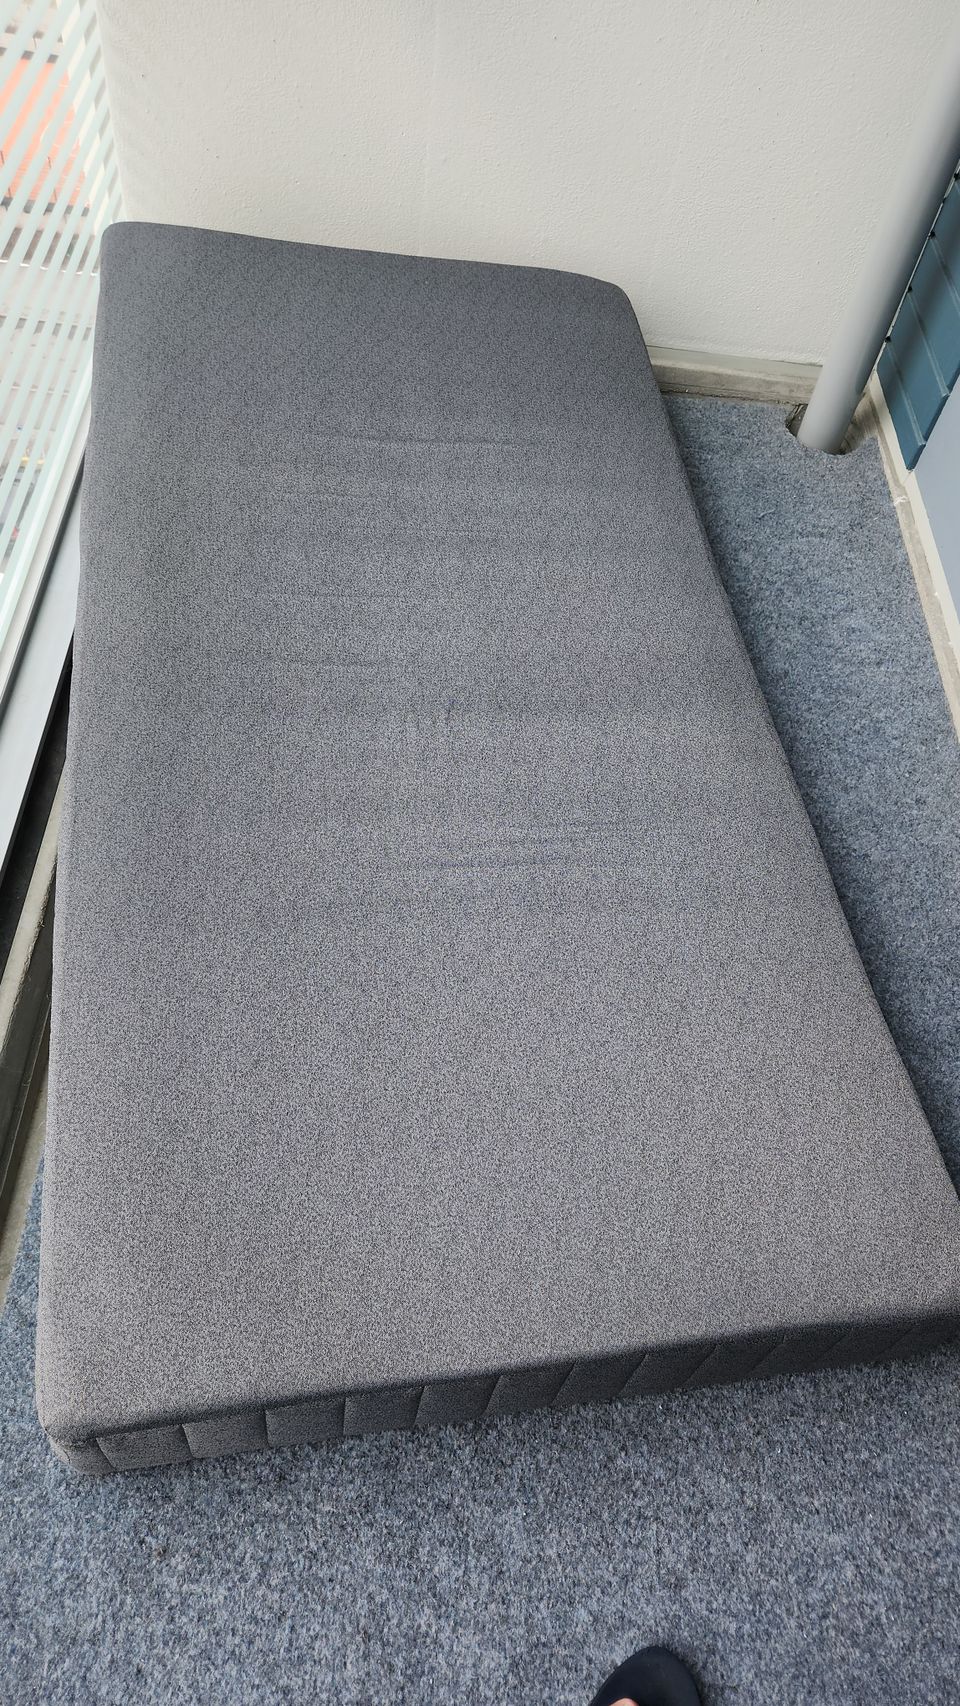 Fame mattress for sale